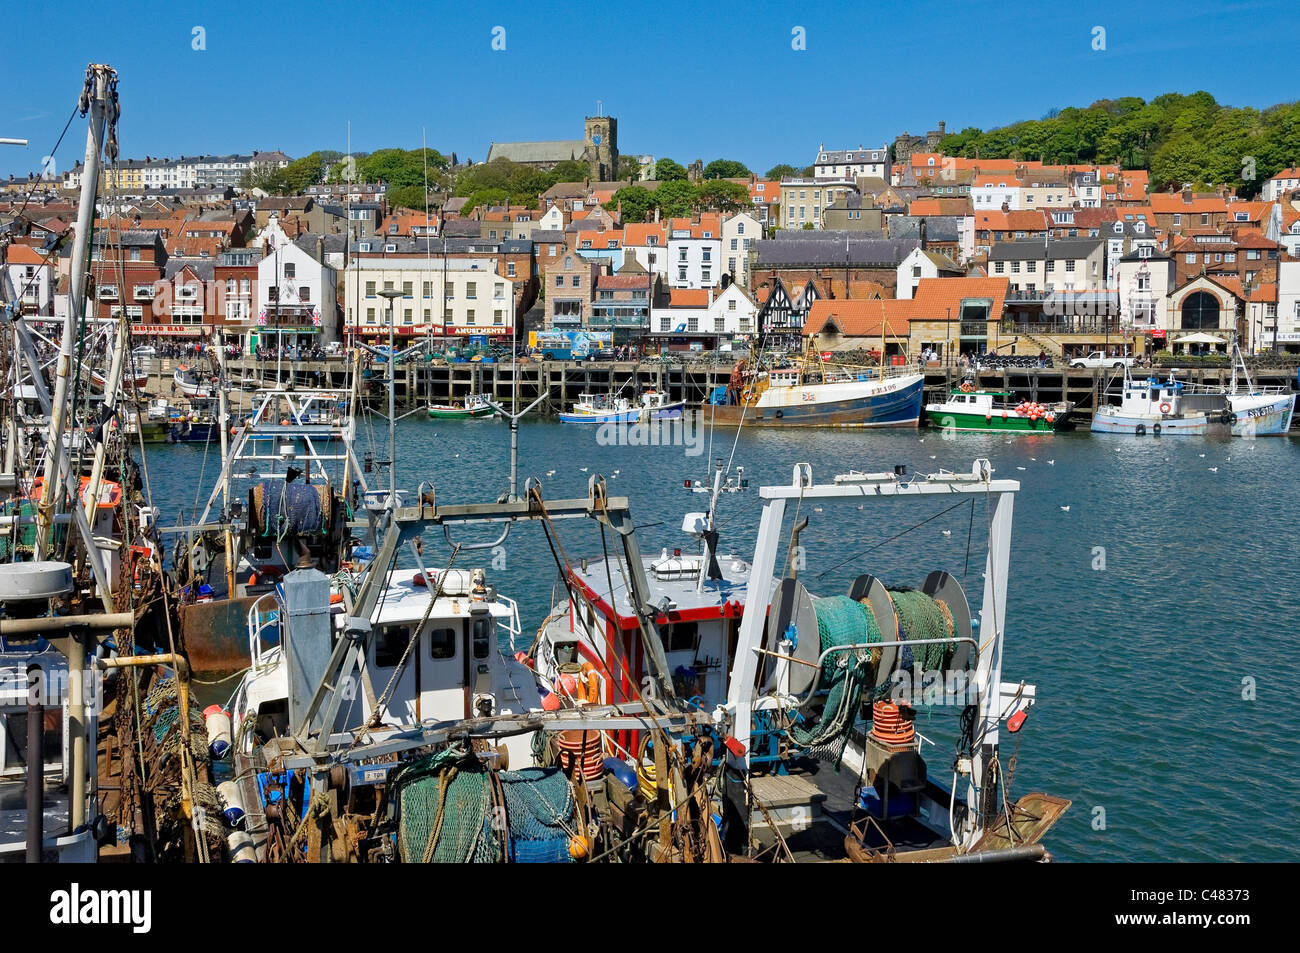 Fishing boats boat moored at the quayside Scarborough Harbour North Yorkshire England UK United Kingdom GB Great Britain Stock Photo